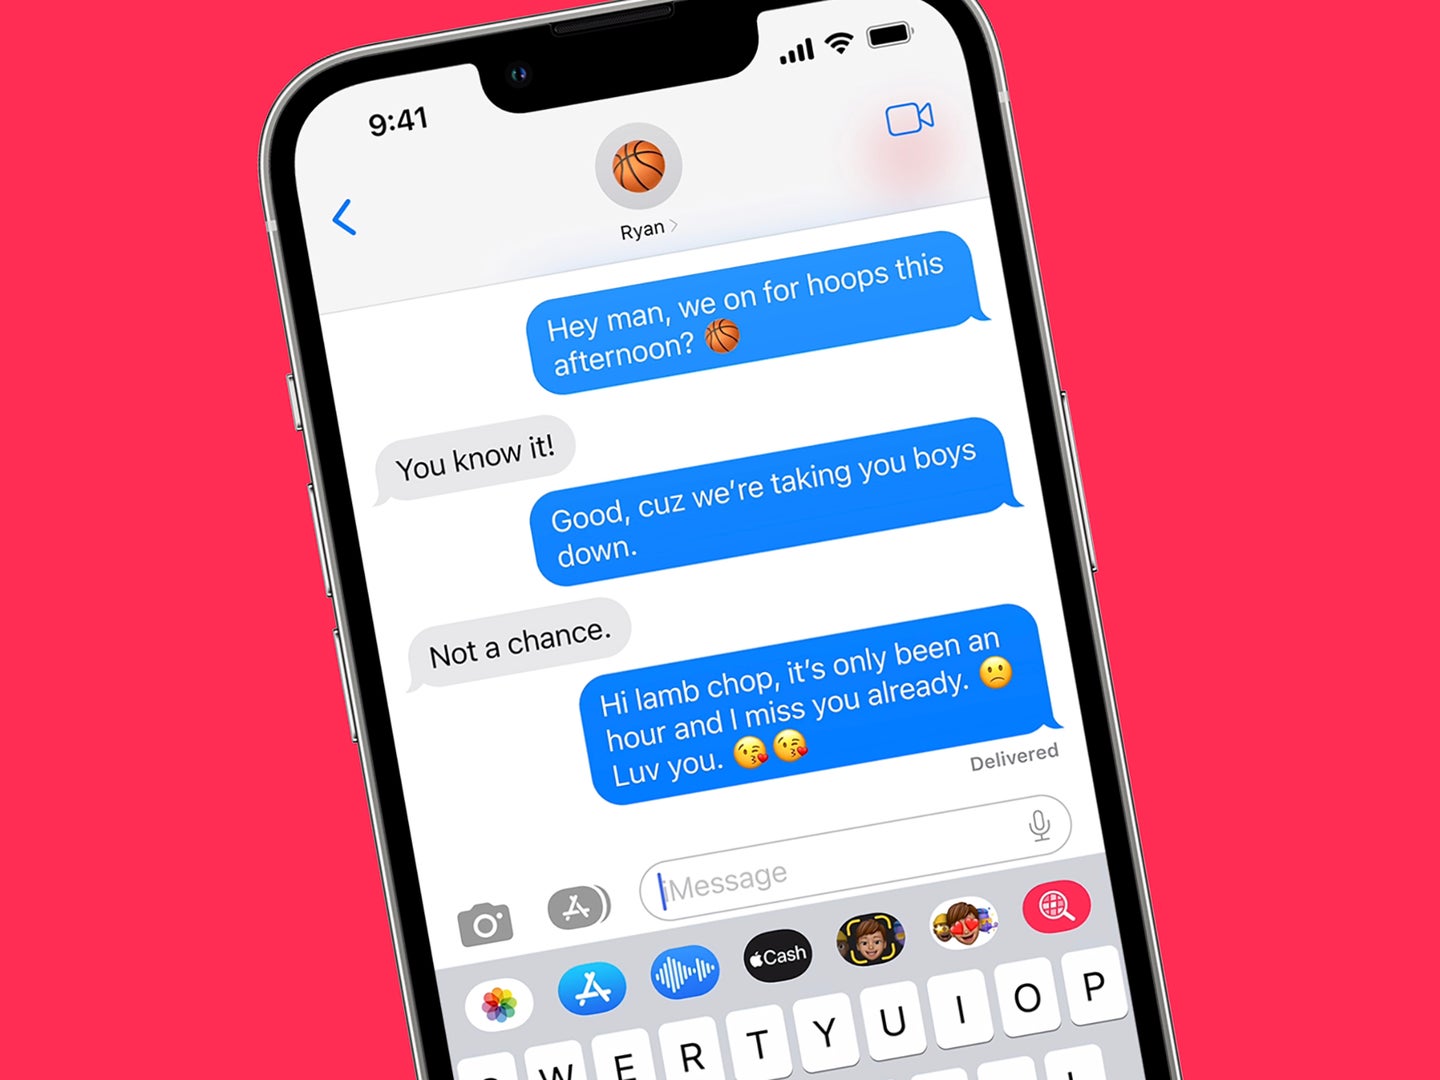 An iPhone iMessage conversation about basketball, with an incorrectly sent message to a romantic partner at the end.